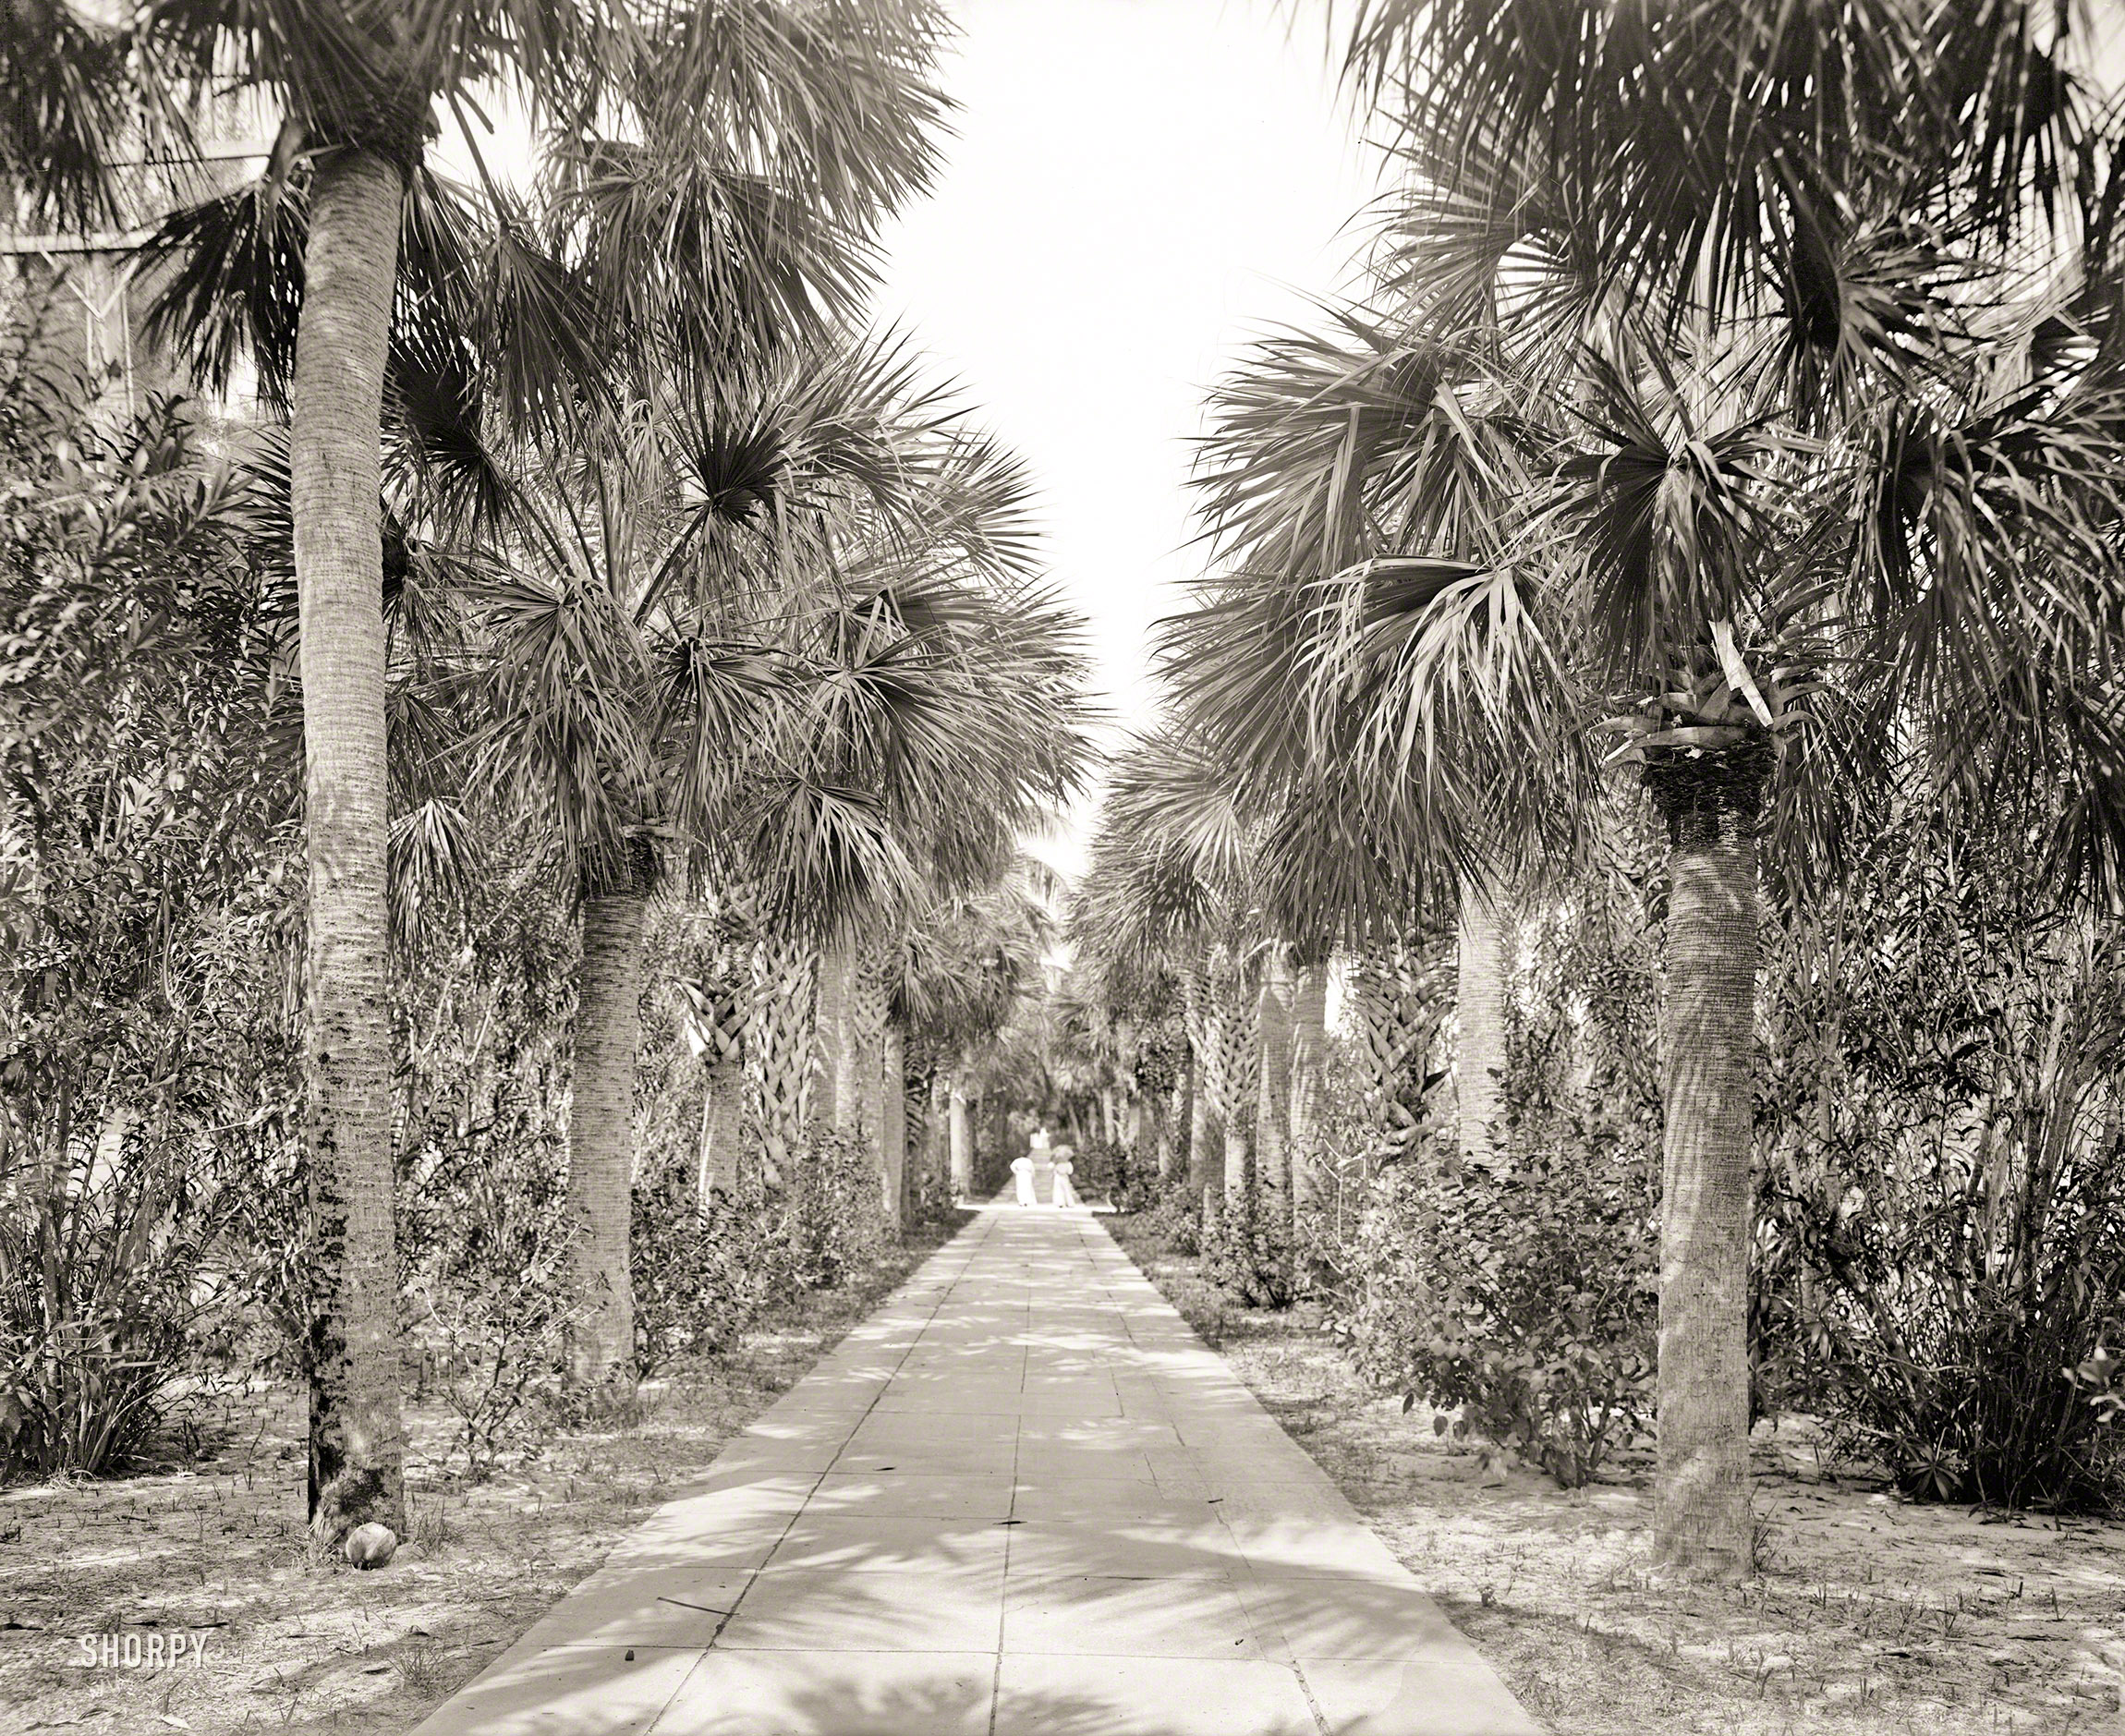 Palm Beach circa 1905. "Avenue of Palms between the Royal Poinciana Hotel and the Breakers." 8x10 inch dry plate glass negative. View full size.